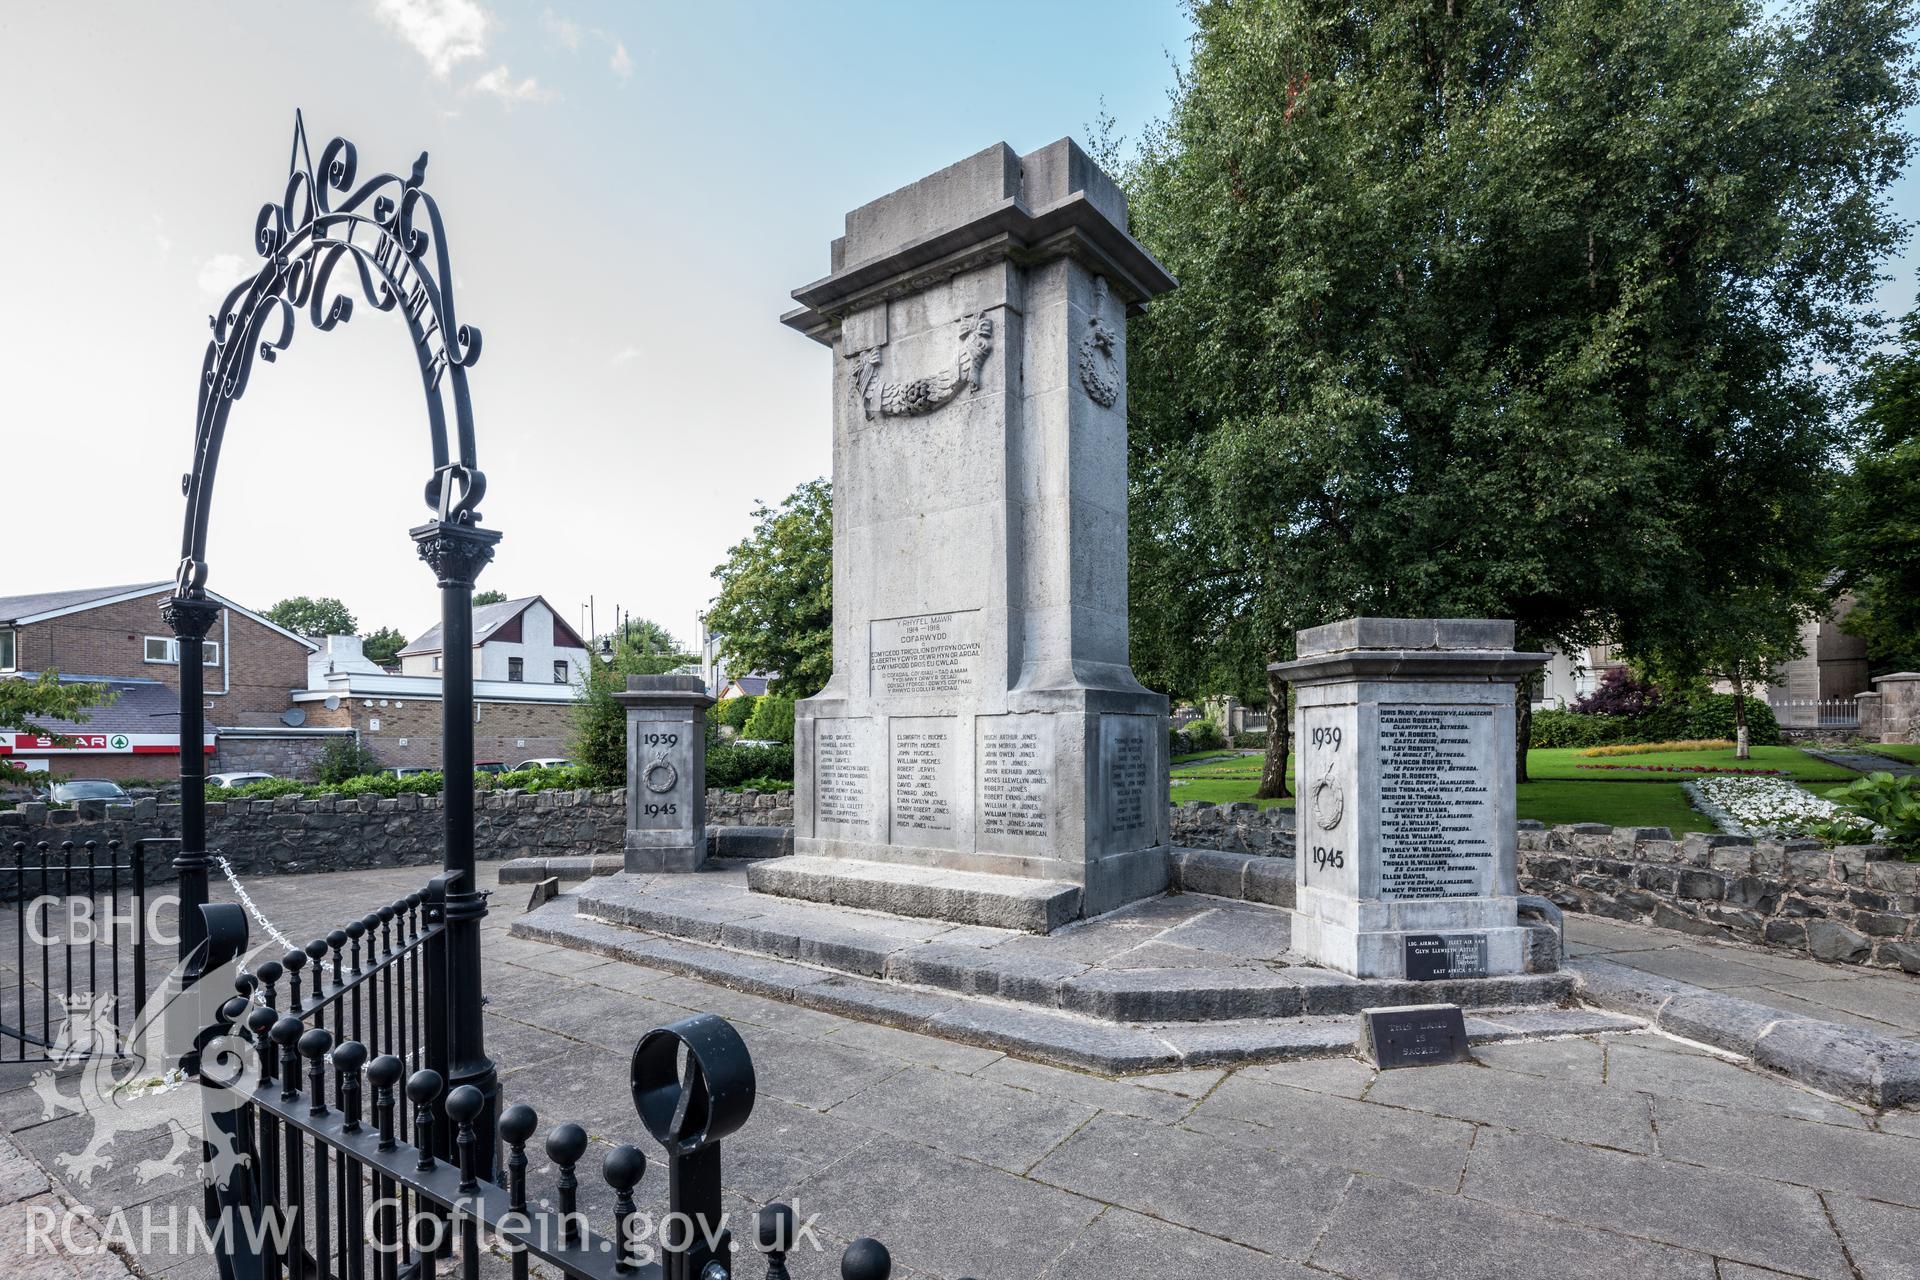 Cenotaph with flanking World War 2 memorials and entrance from the southeast